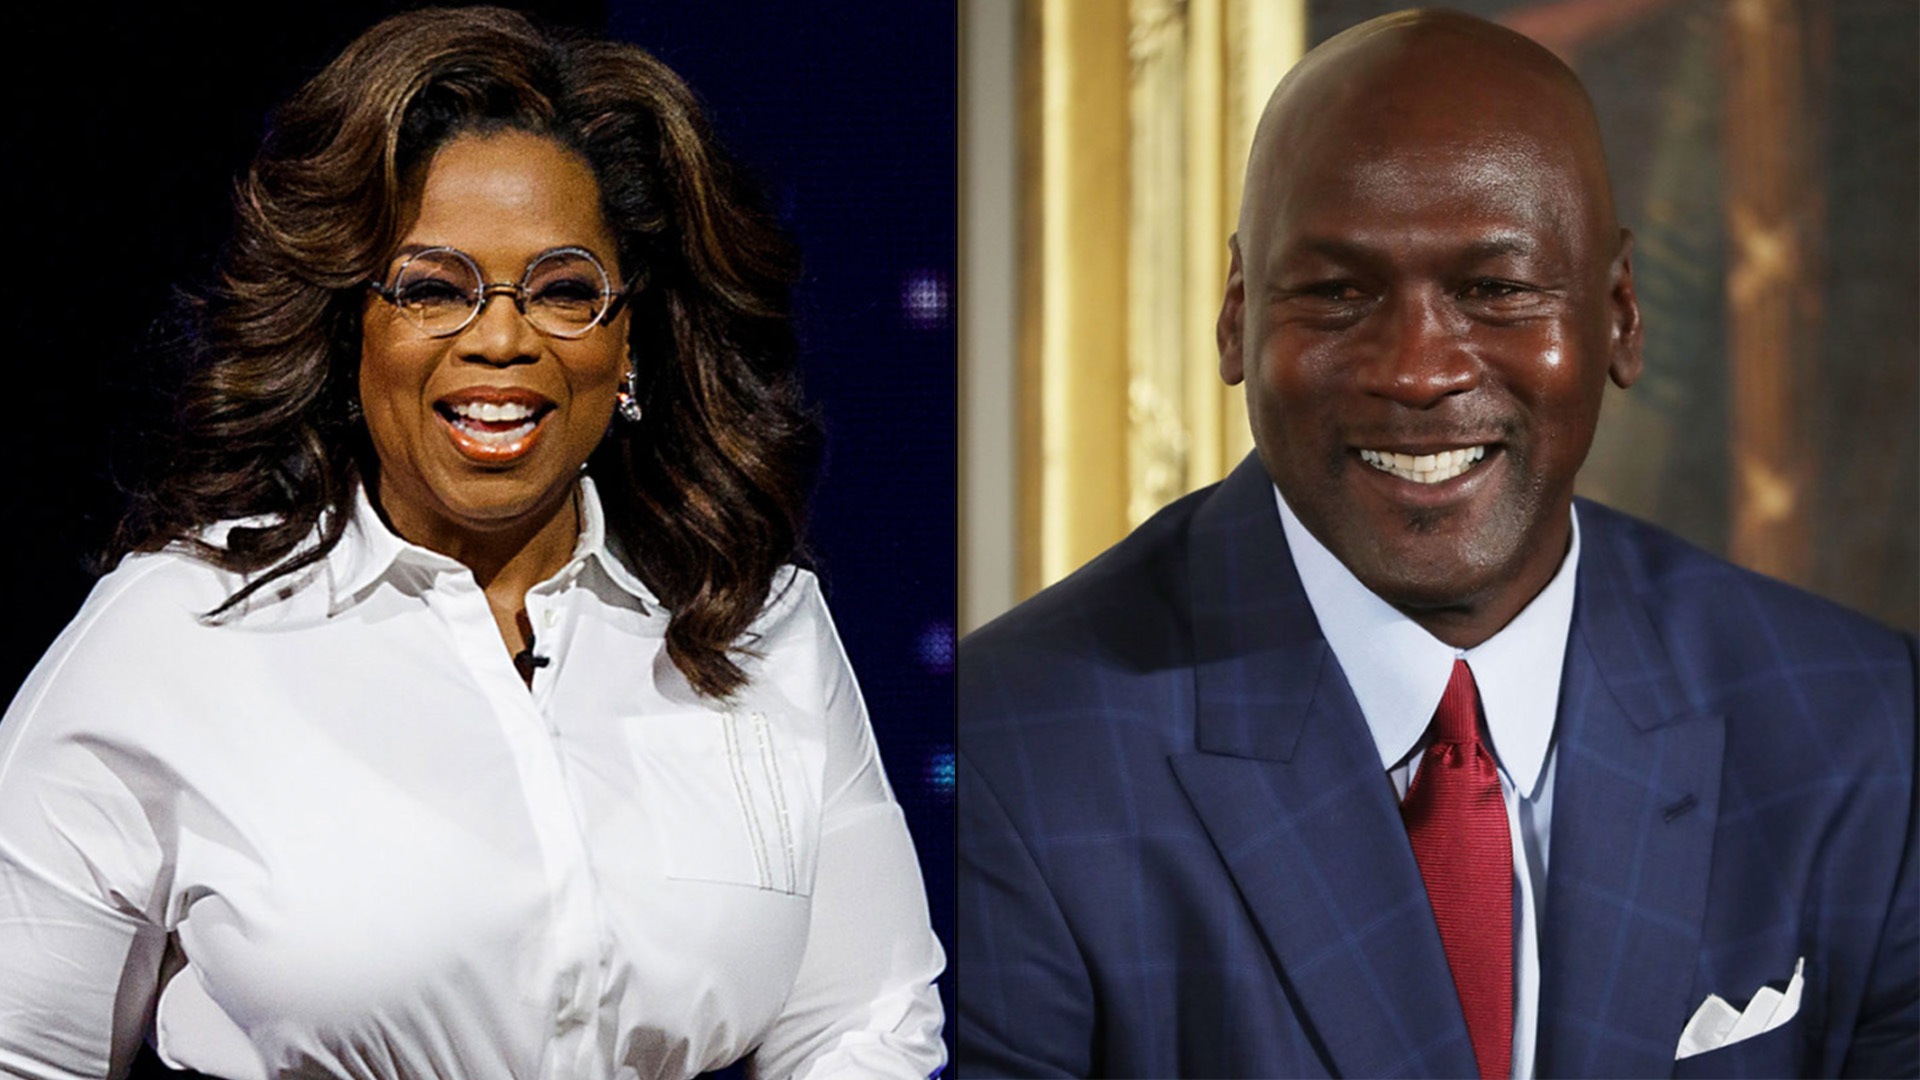 Forbes Deemed These Black Billionaires As 'Too Poor' To Make Its 2022 Forbes 400 List